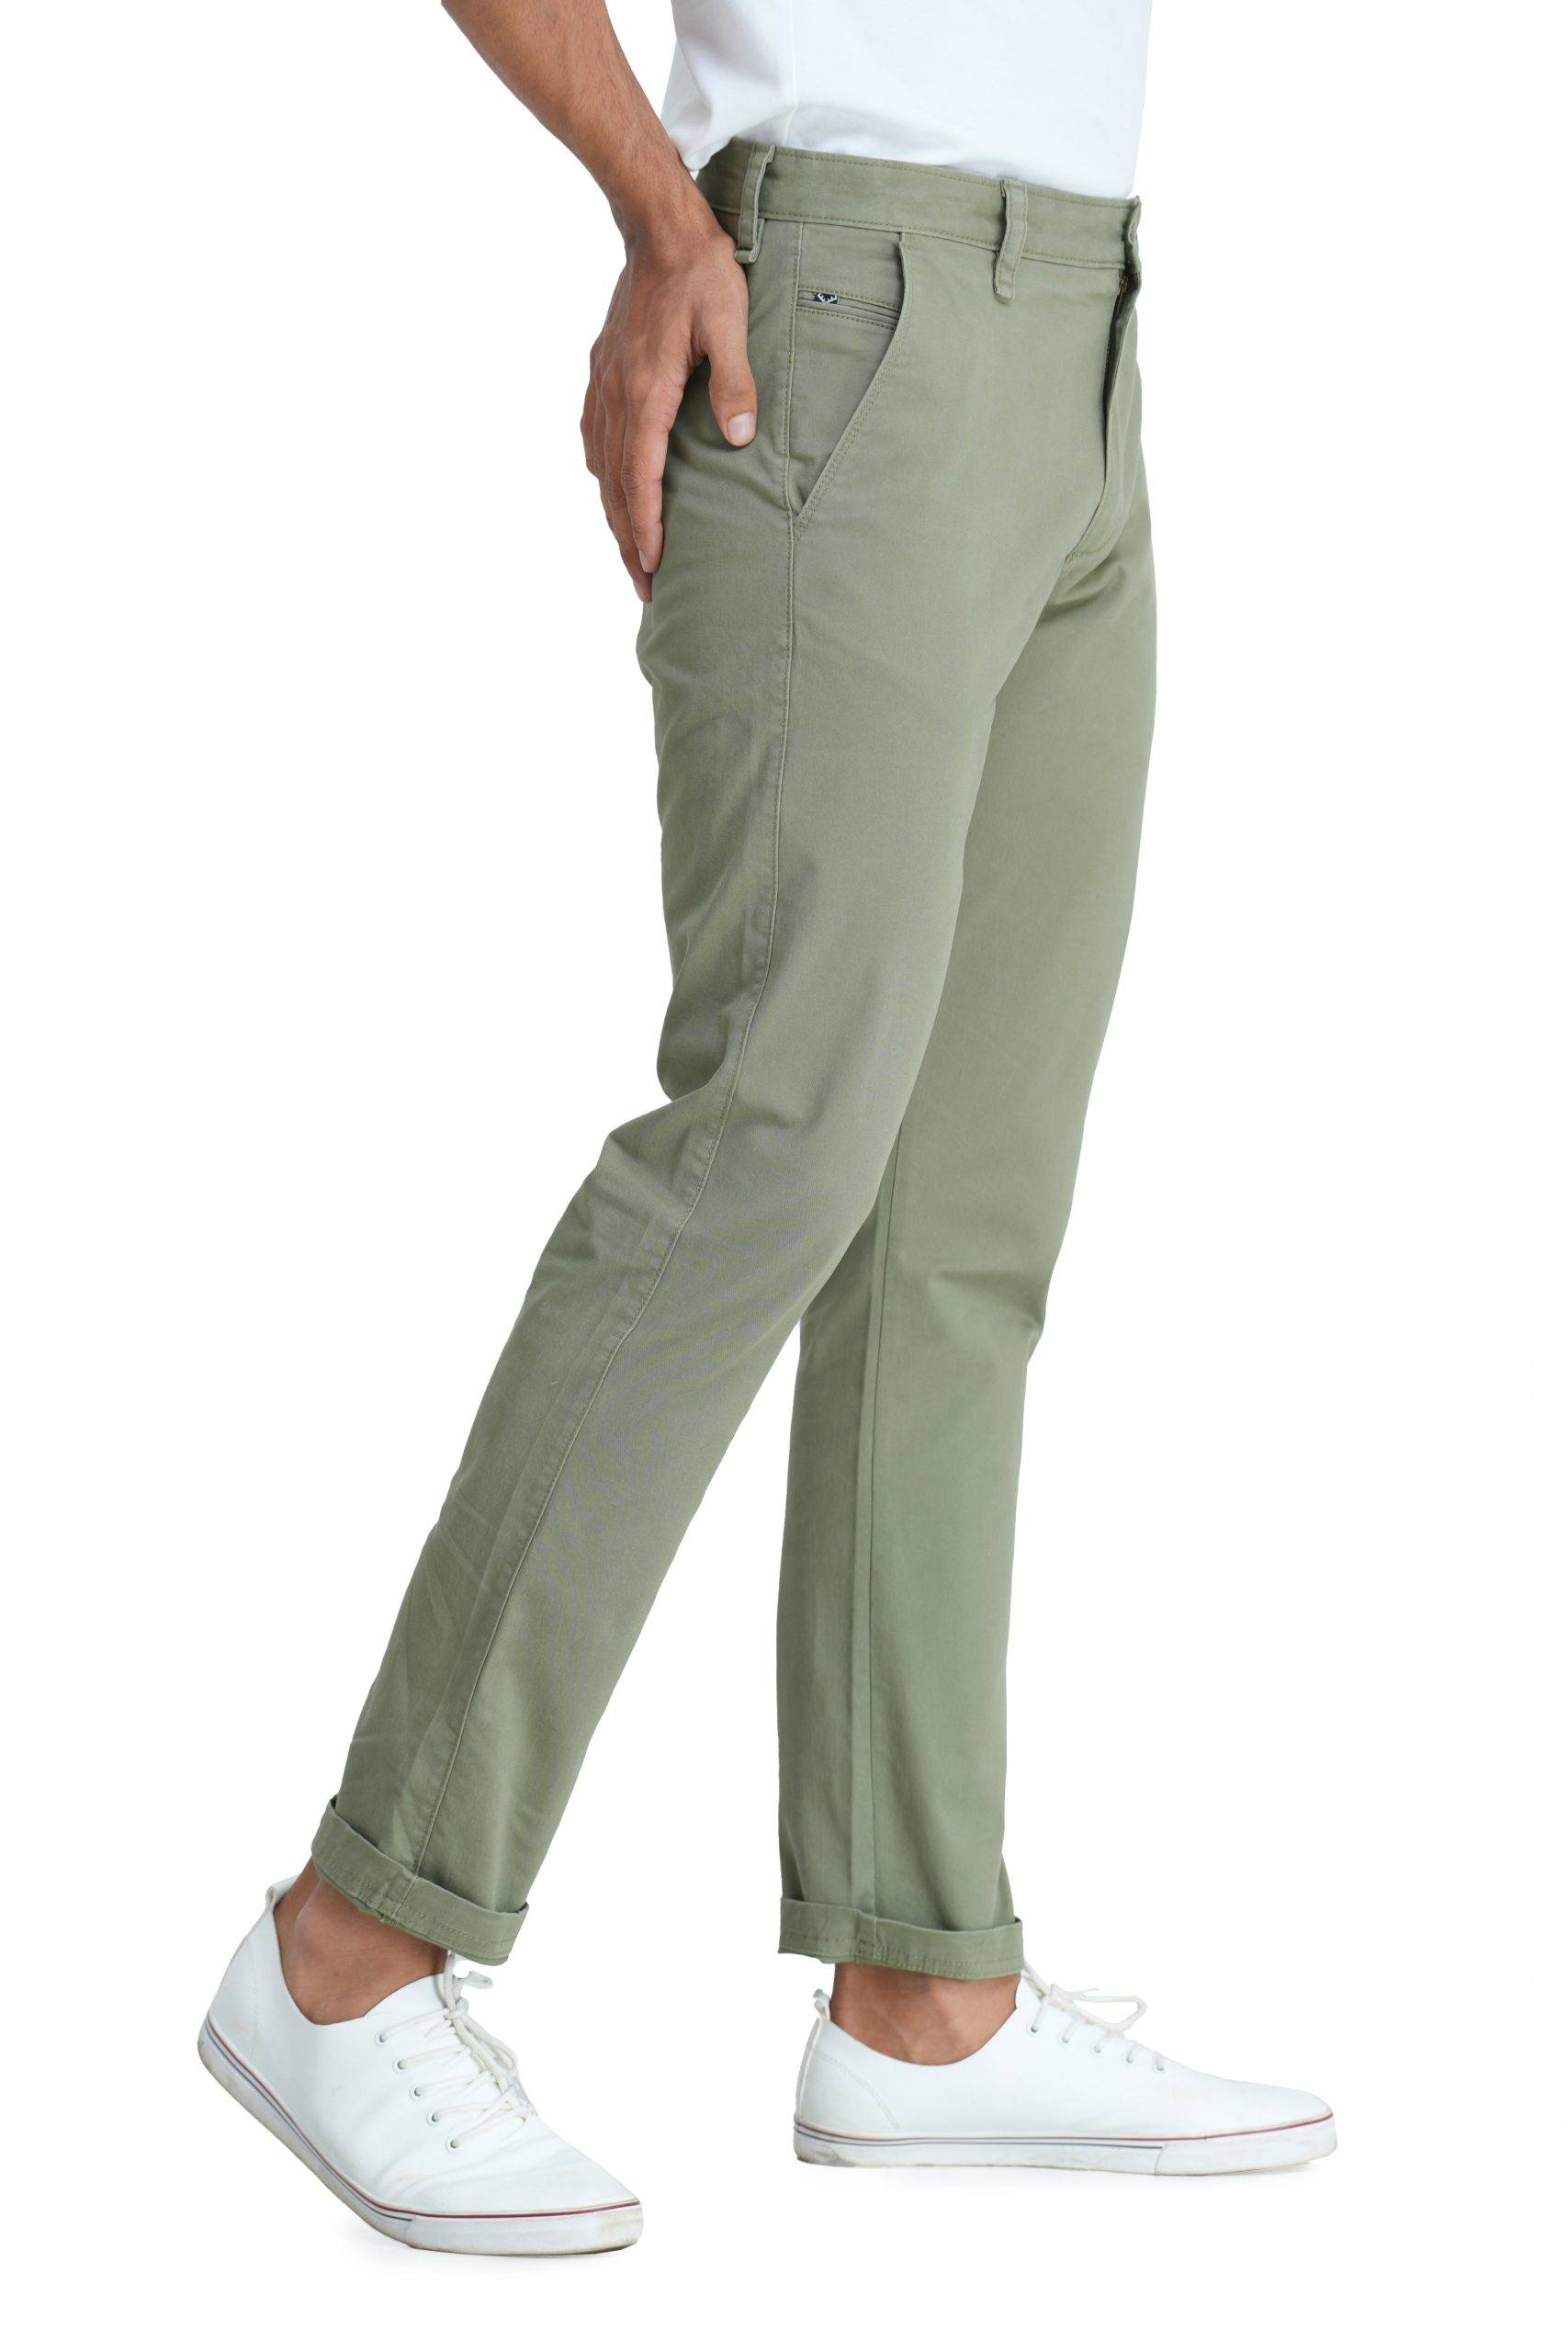 Premium Casual Stretch Chino Pant- Light Olive